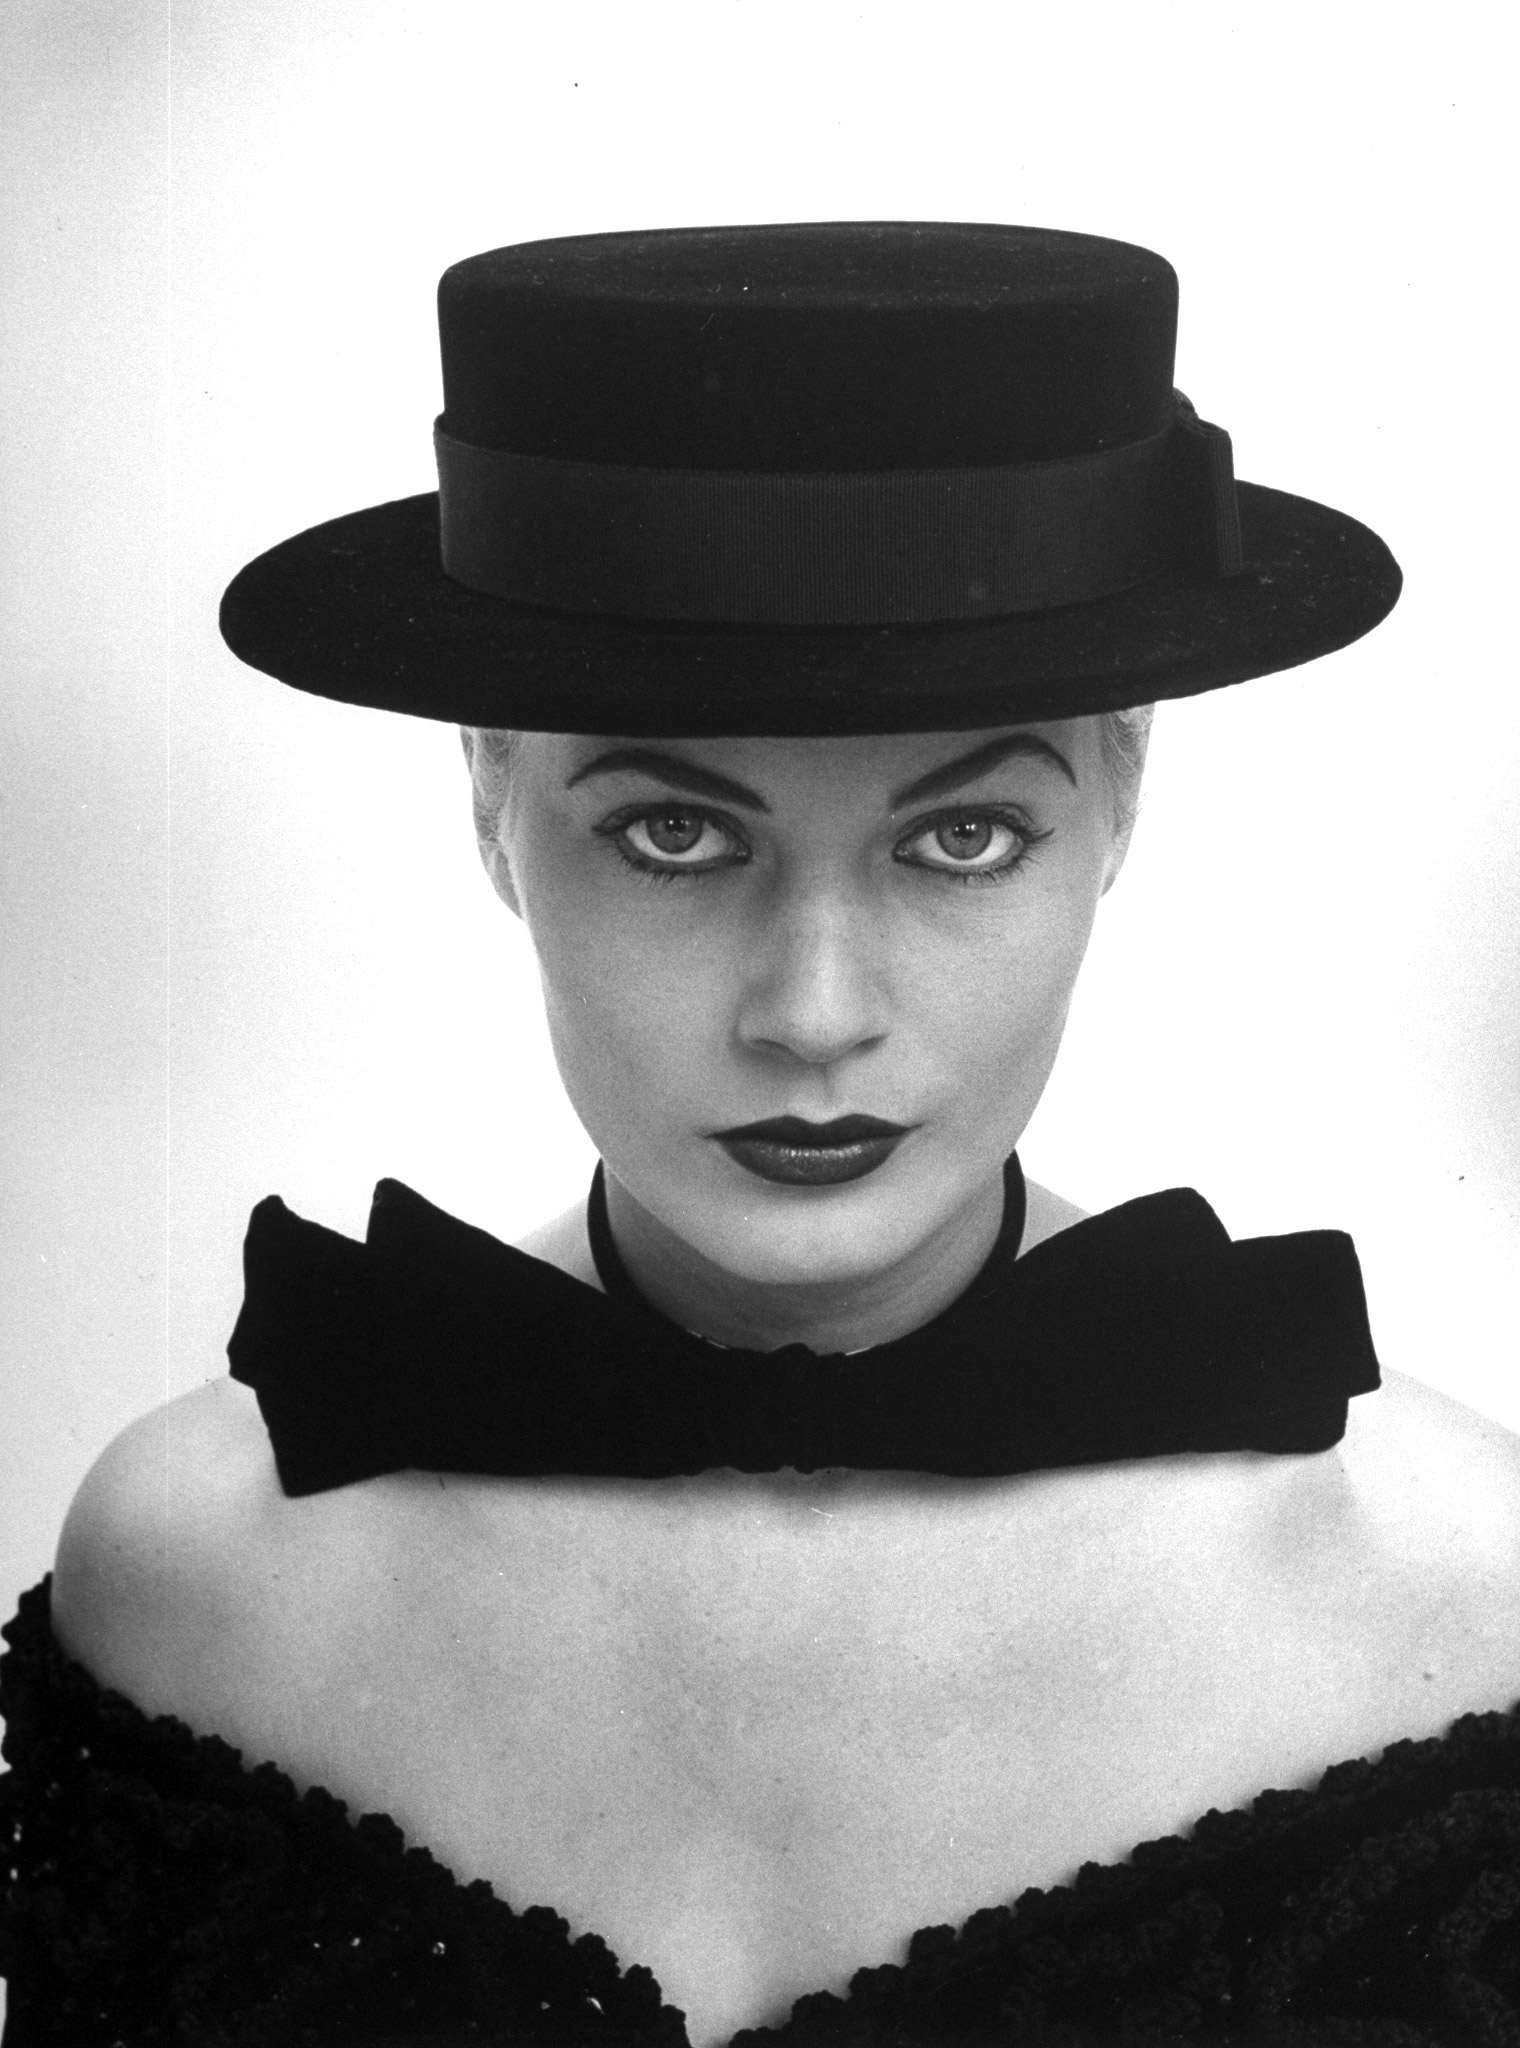 Miss Sweden Anita Ekberg, sporting a severely styled sailor hat during her hat-buying spree while visiting US, 1951.